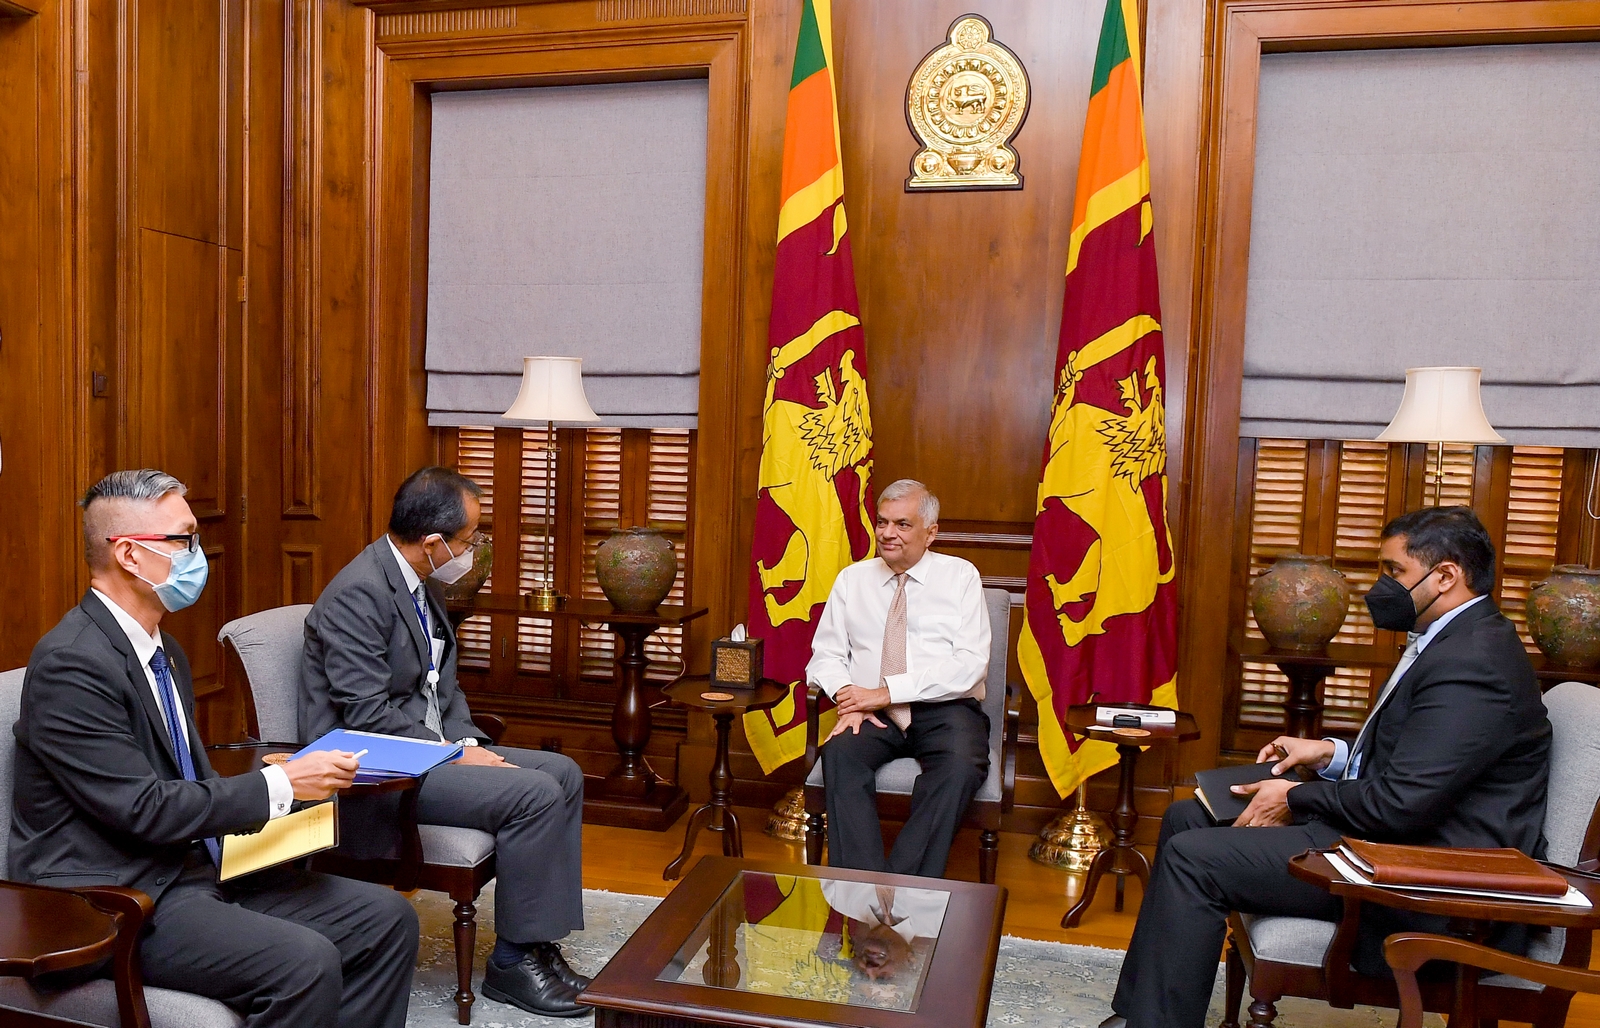 Discussions to provide support from ADB for several sectors in Sri Lanka